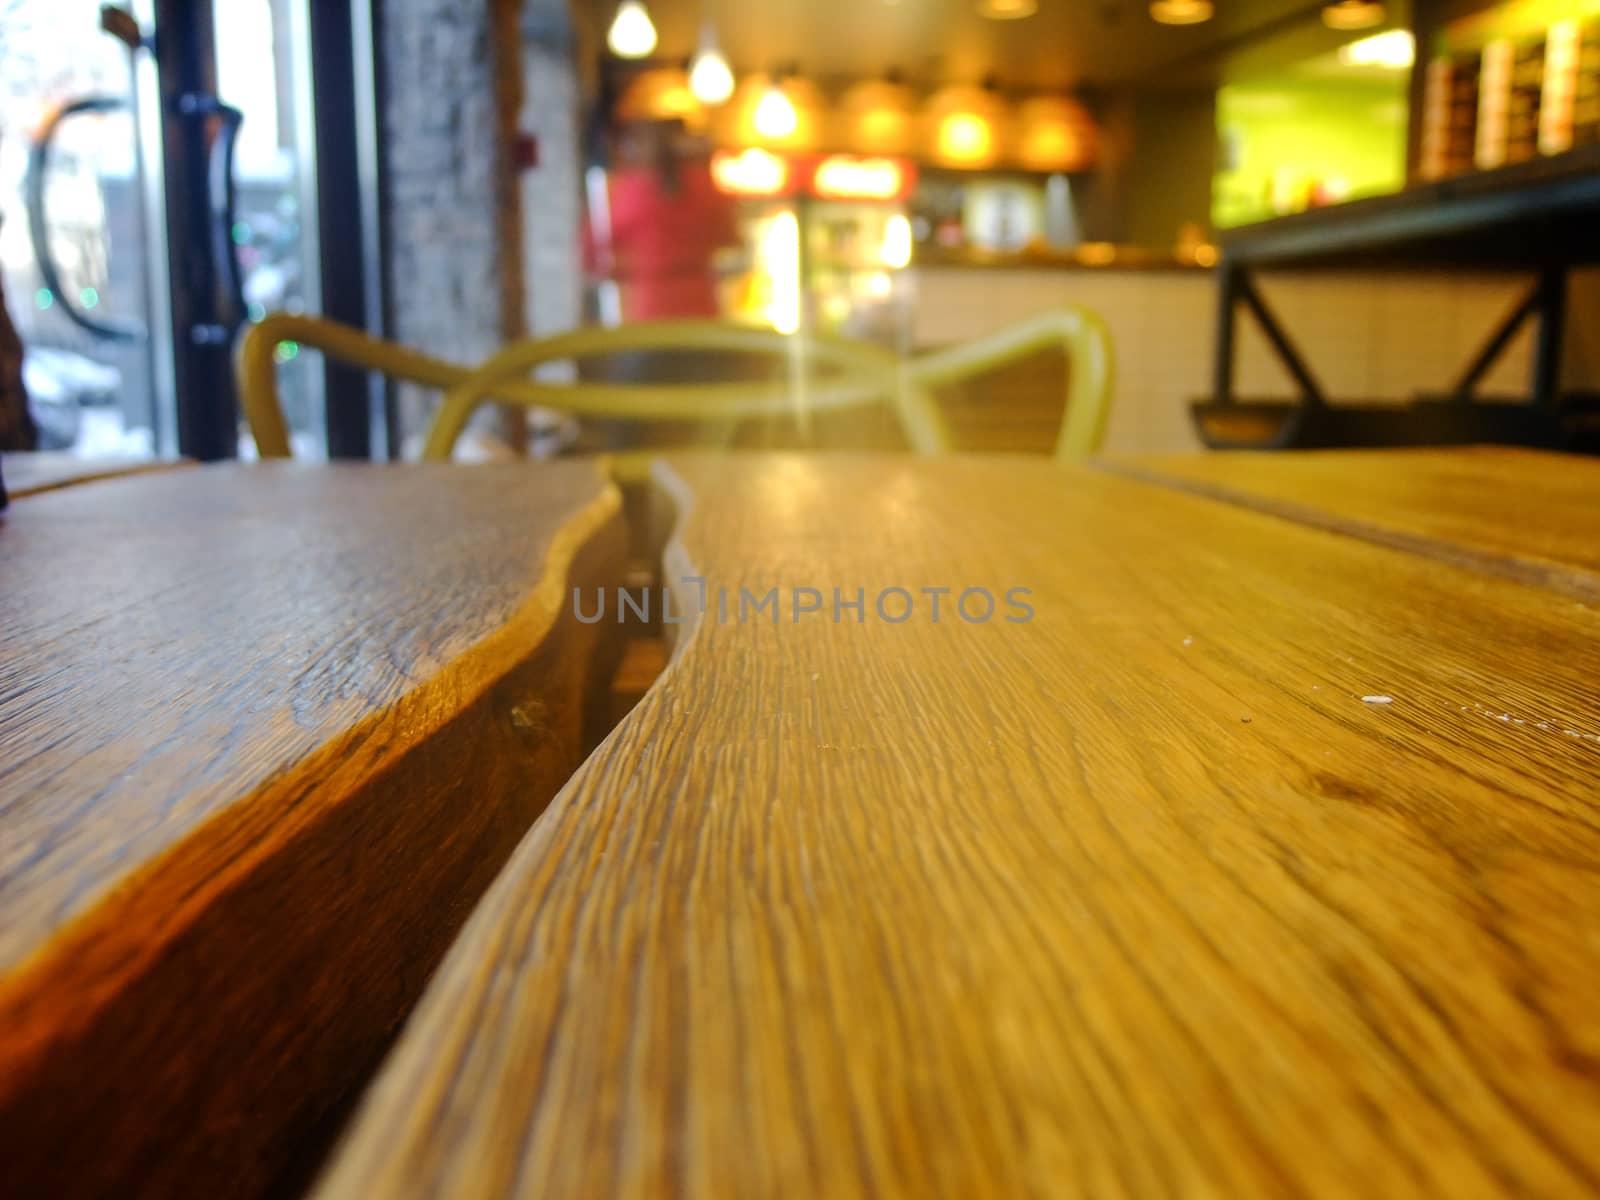 Closeup of wooden Table with Chairs in the Restaurant